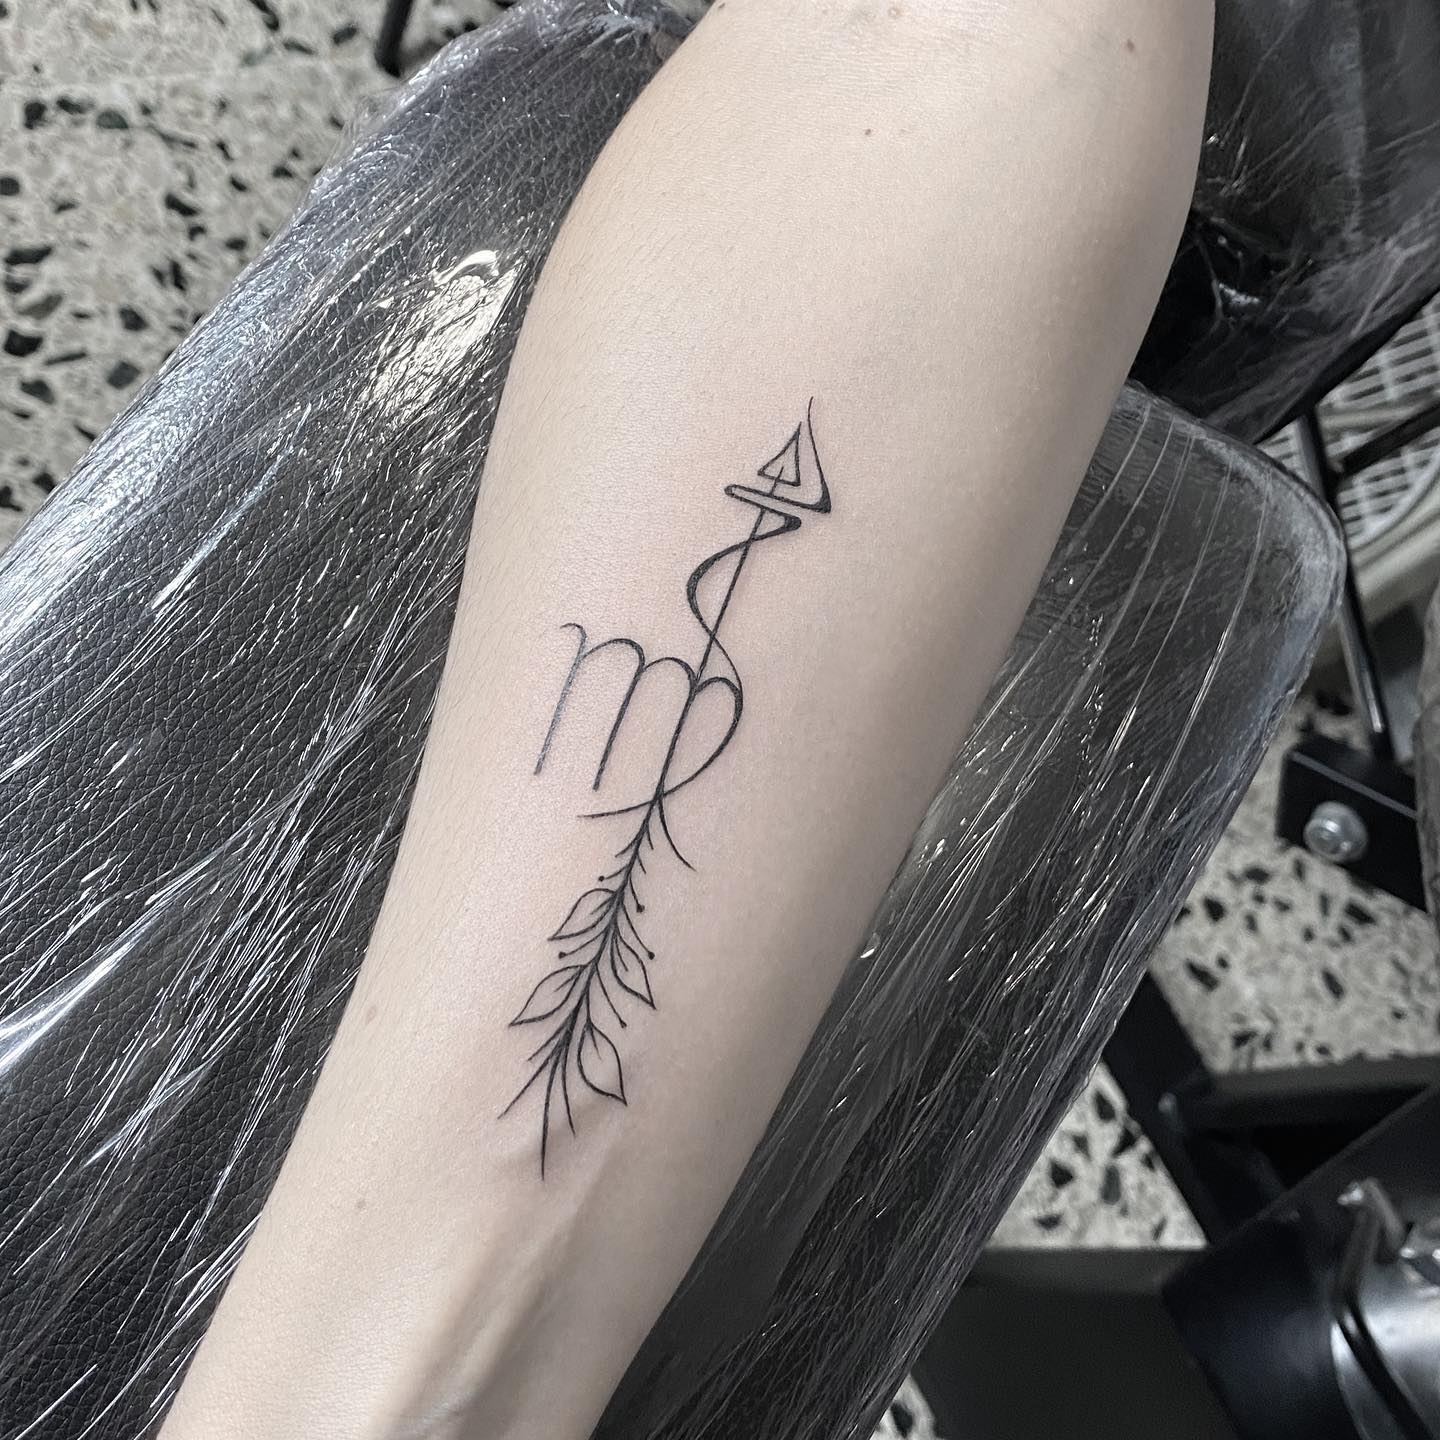 Arrows are tools that were used for protection from harm, so why don't you get a tattoo of it with your zodiac sign? They are there to protect you all the time.